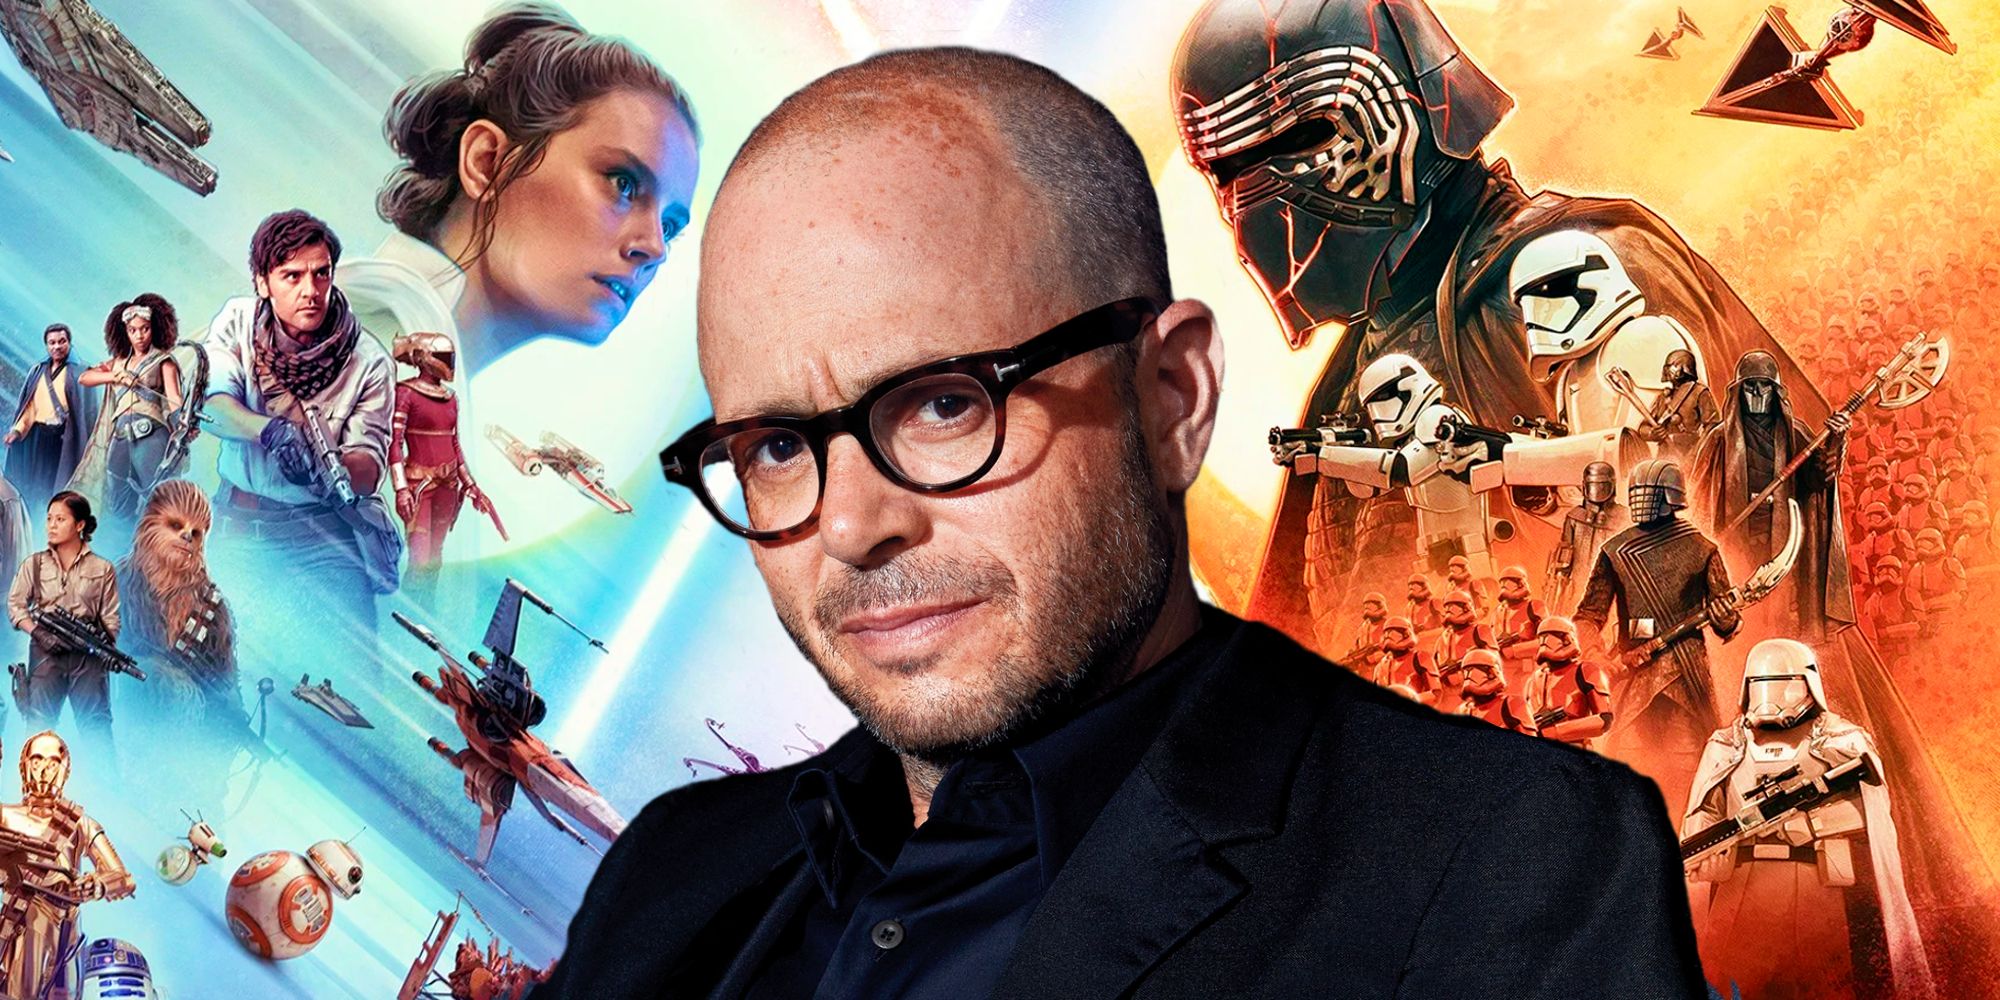 Damon Lindelof over a mural for the Star Wars sequels